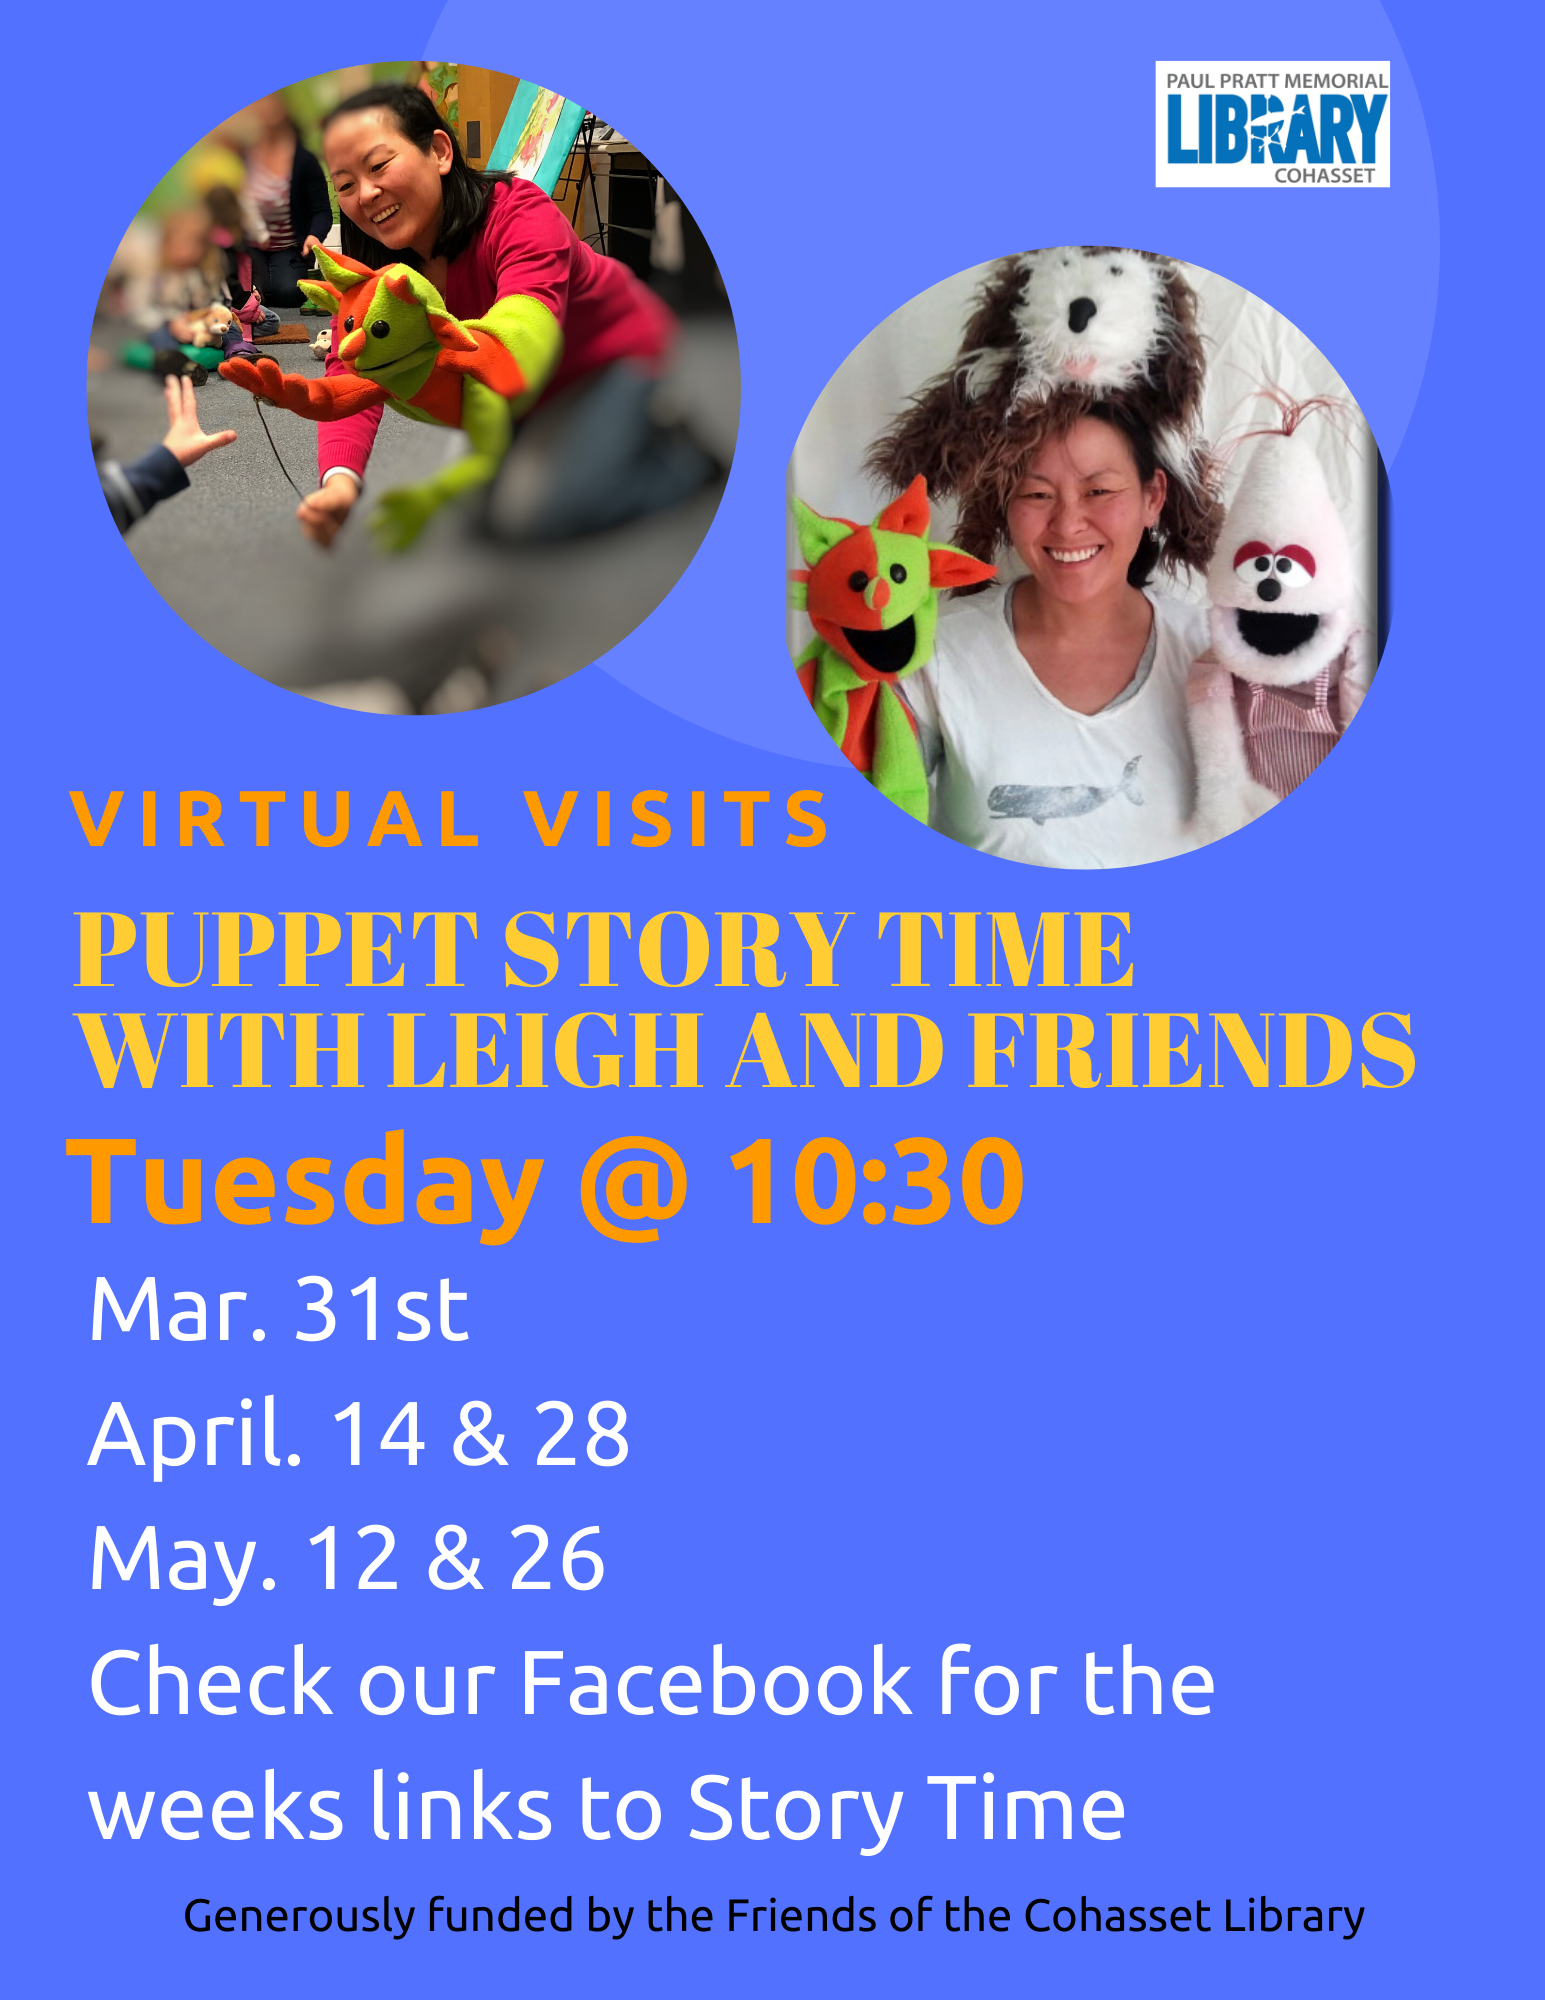 Virtual puppet story time with dates